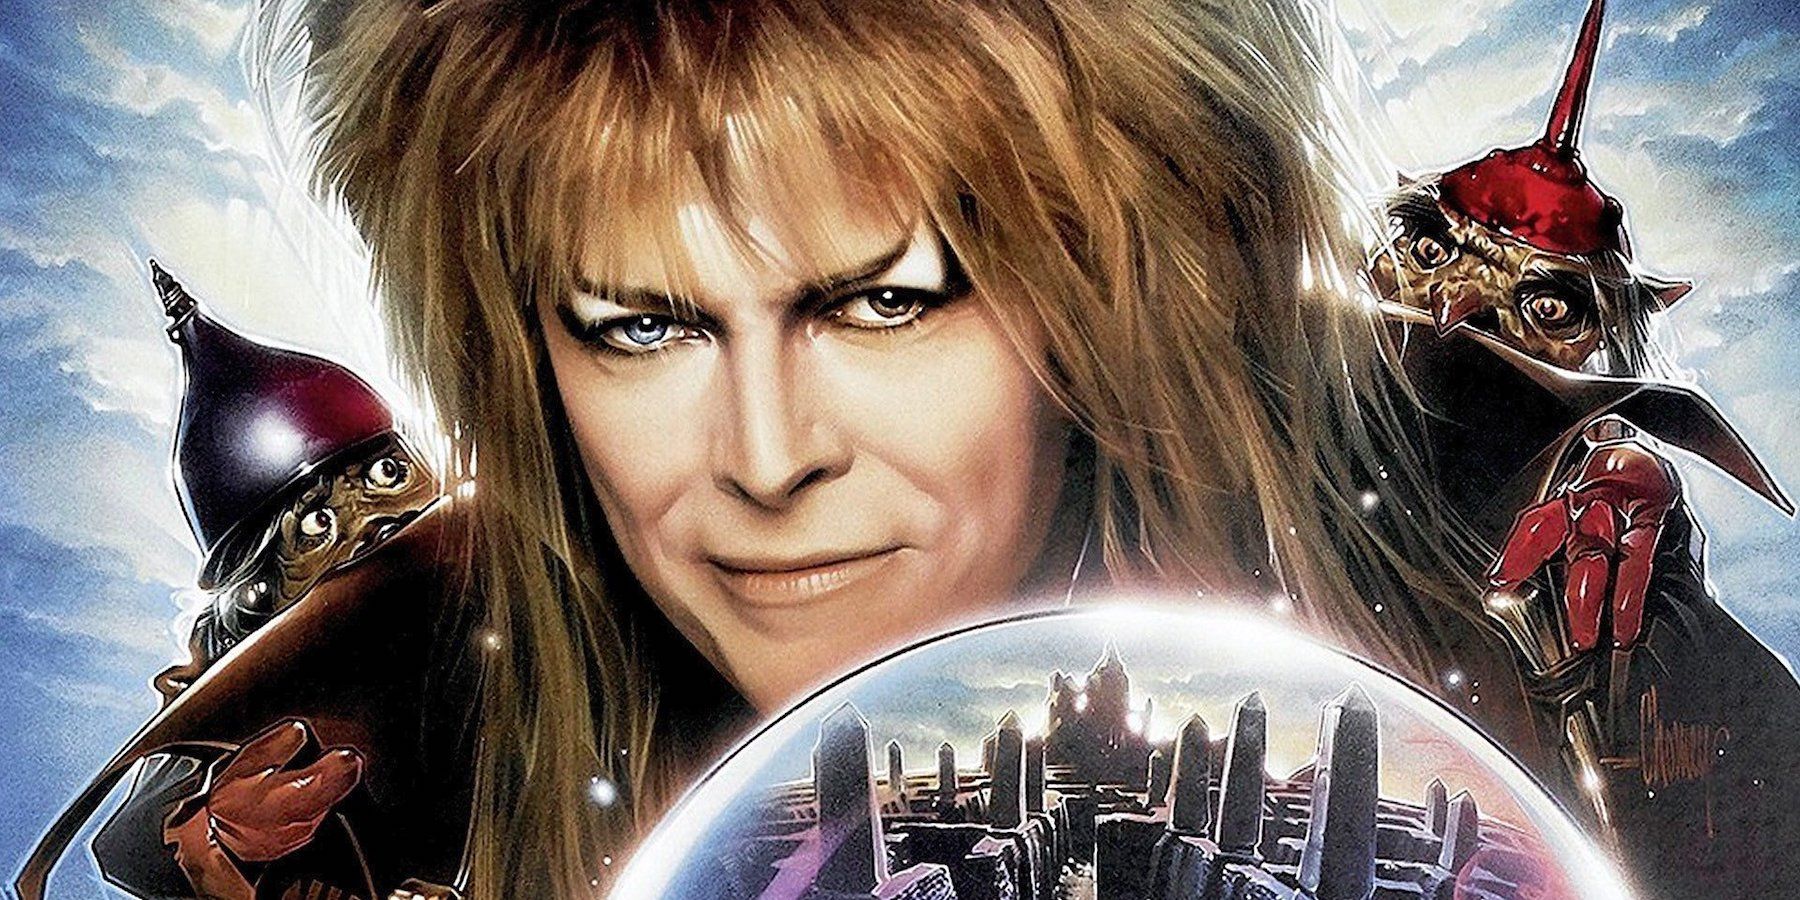 Who Should Play Jareth in the Labyrinth Sequel